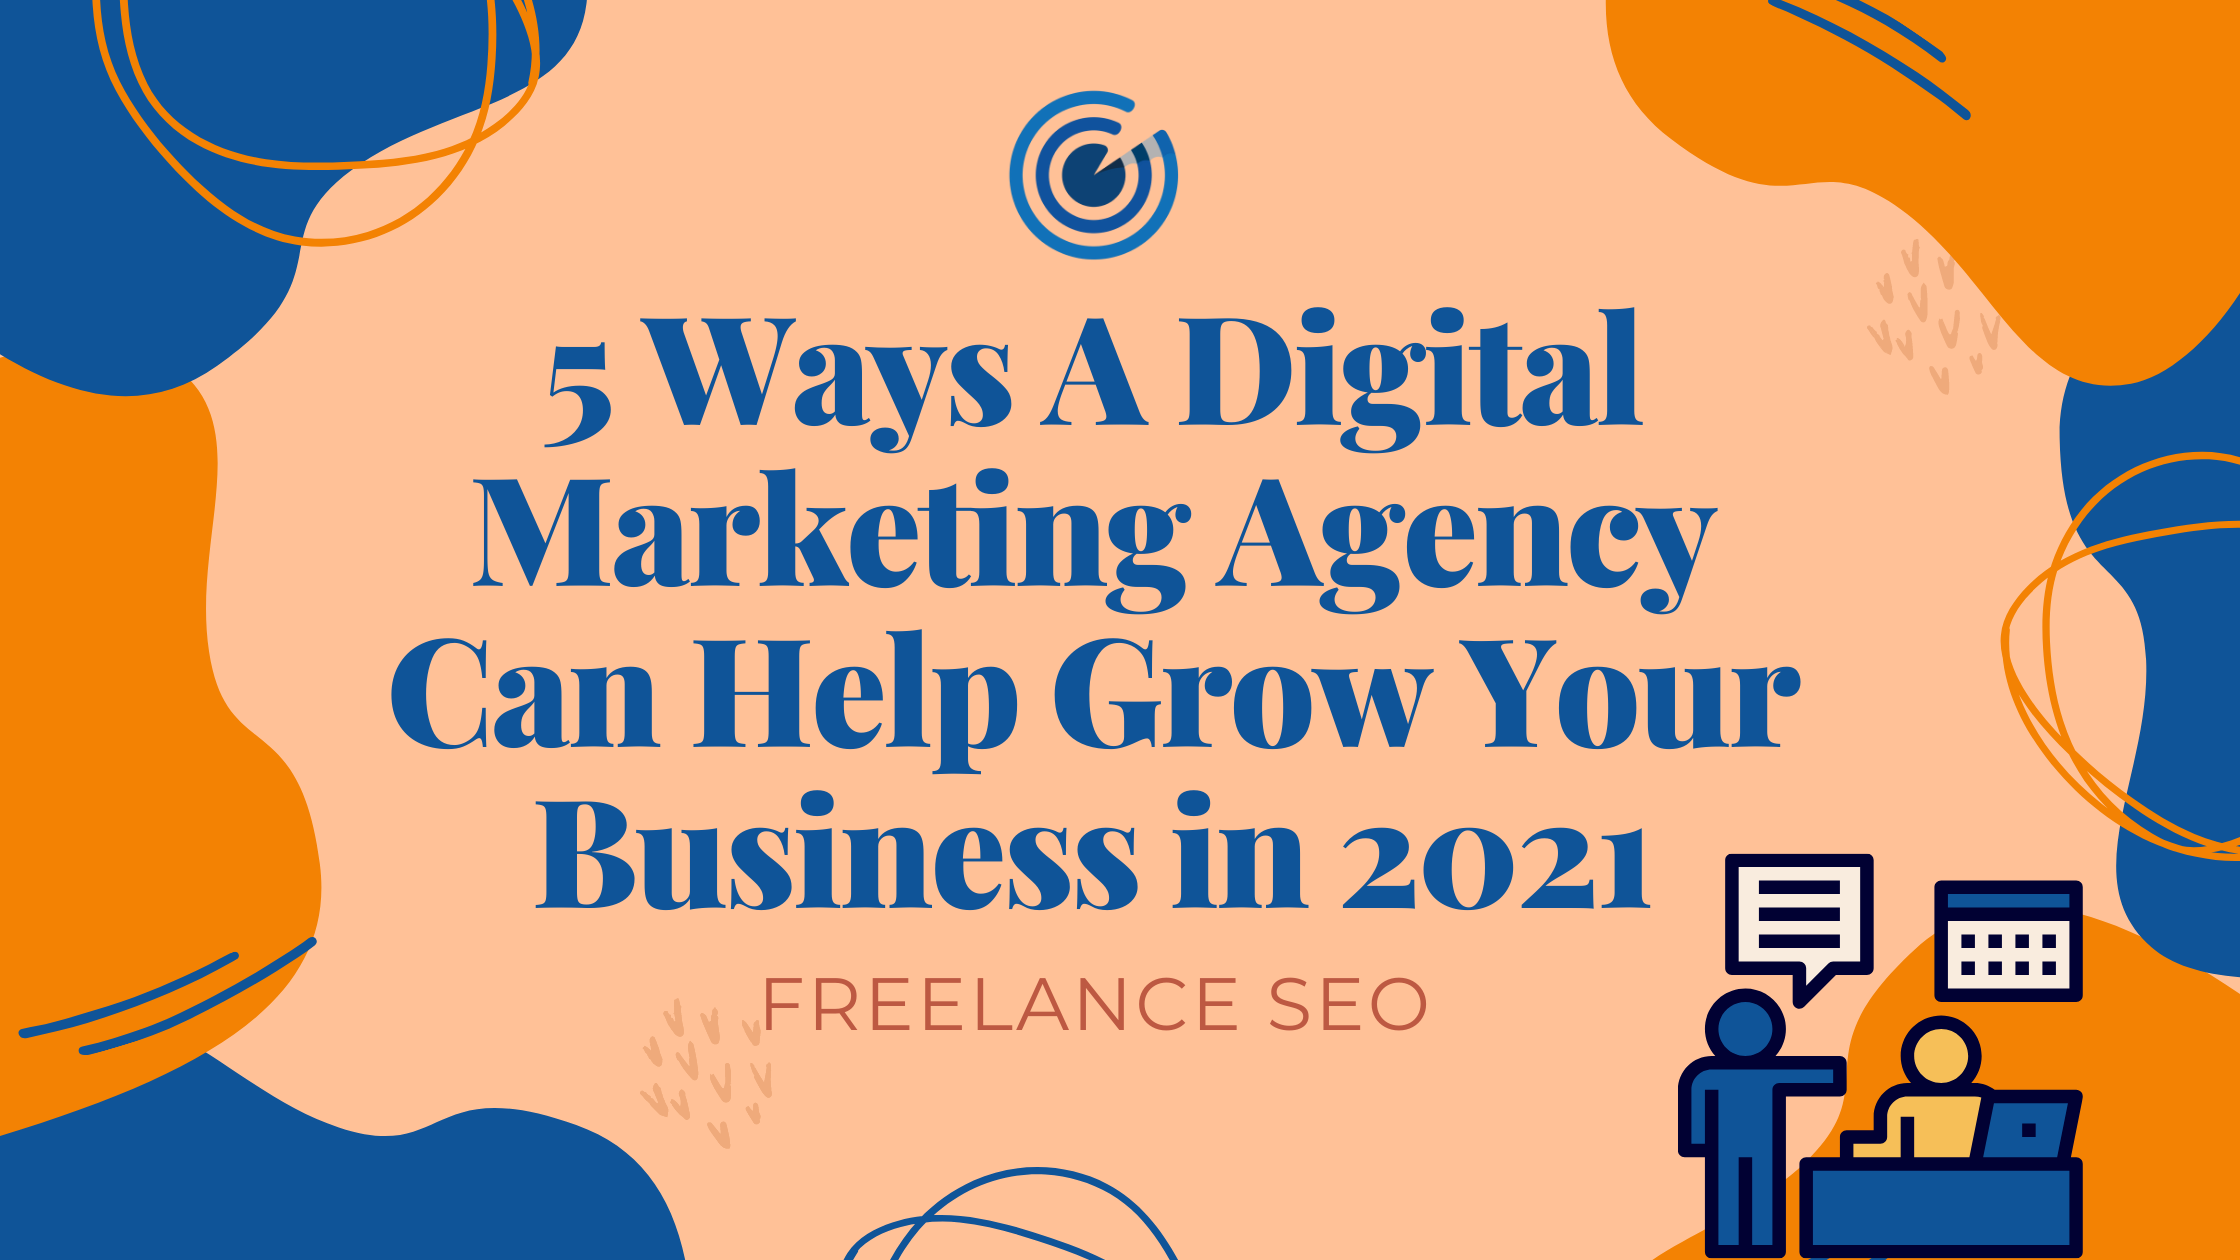 5 Ways A Digital Marketing Agency Can Help Grow Your Business in 2021